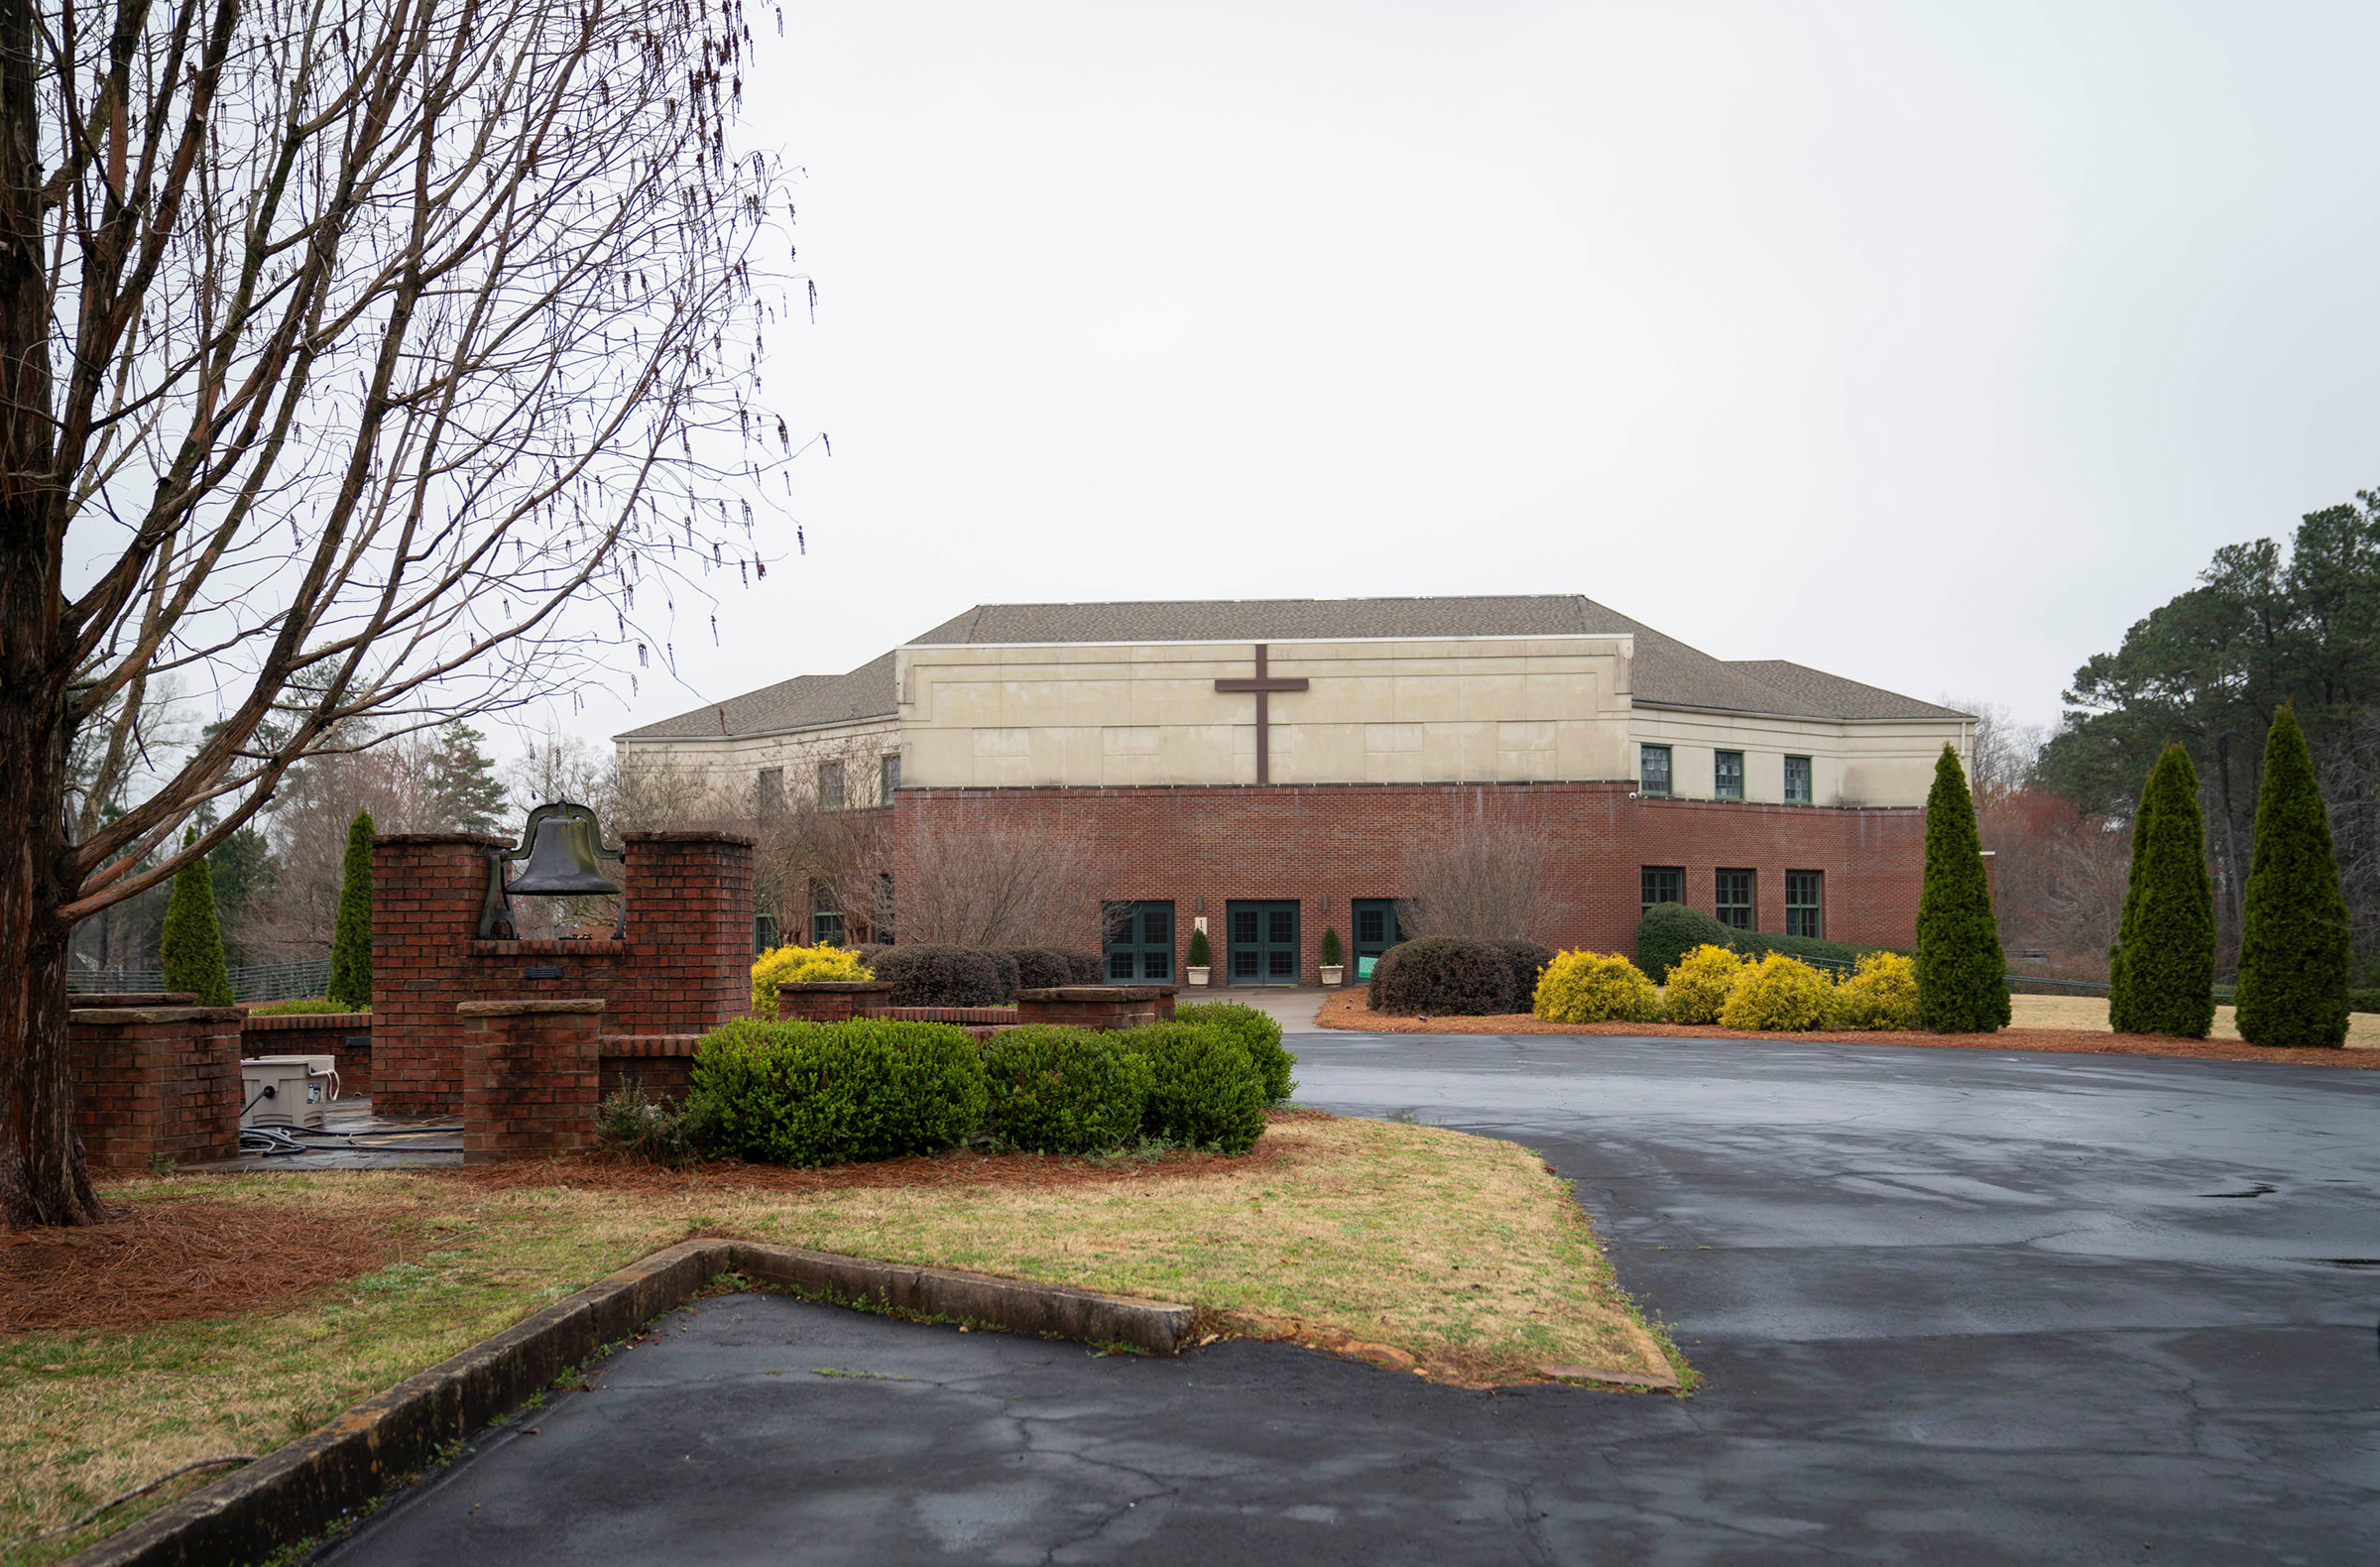 Crabapple First Baptist Church, where the Atlanta shooting suspect Robert Aaron Long was an active member, in Milton, Ga., March 17. The church posted a lengthy statement on its website Friday morning that called this week's attacks on three spas 